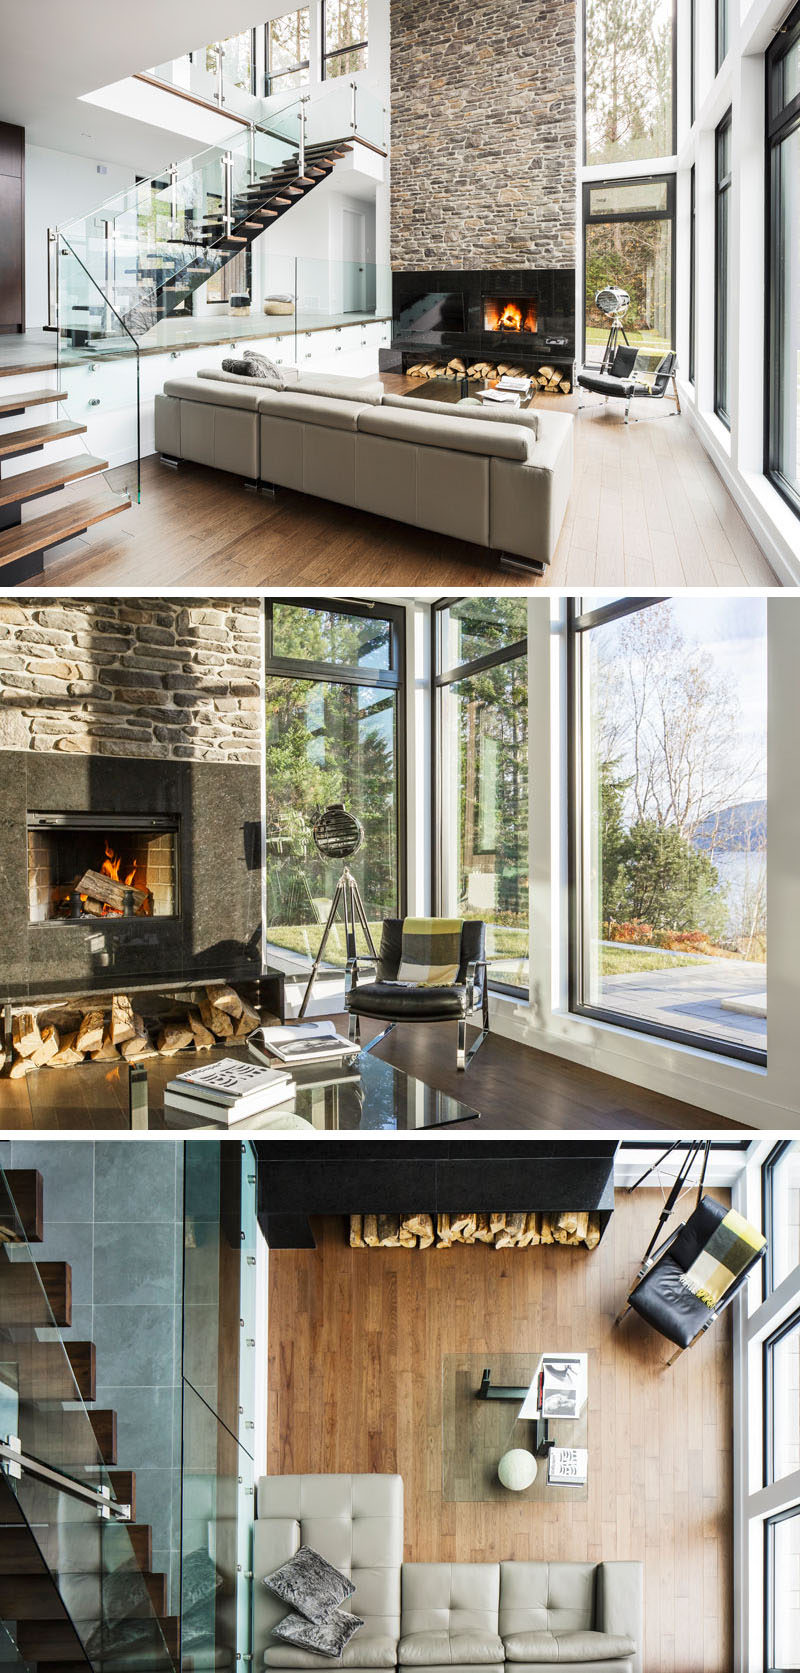 Inside, this contemporary home opens up to reveal a space surrounded by windows that fill the double-height area. The living area is sunken down slightly from the entrance of the home, and a fireplace with stone accent wall draws your eye to the height of the room.